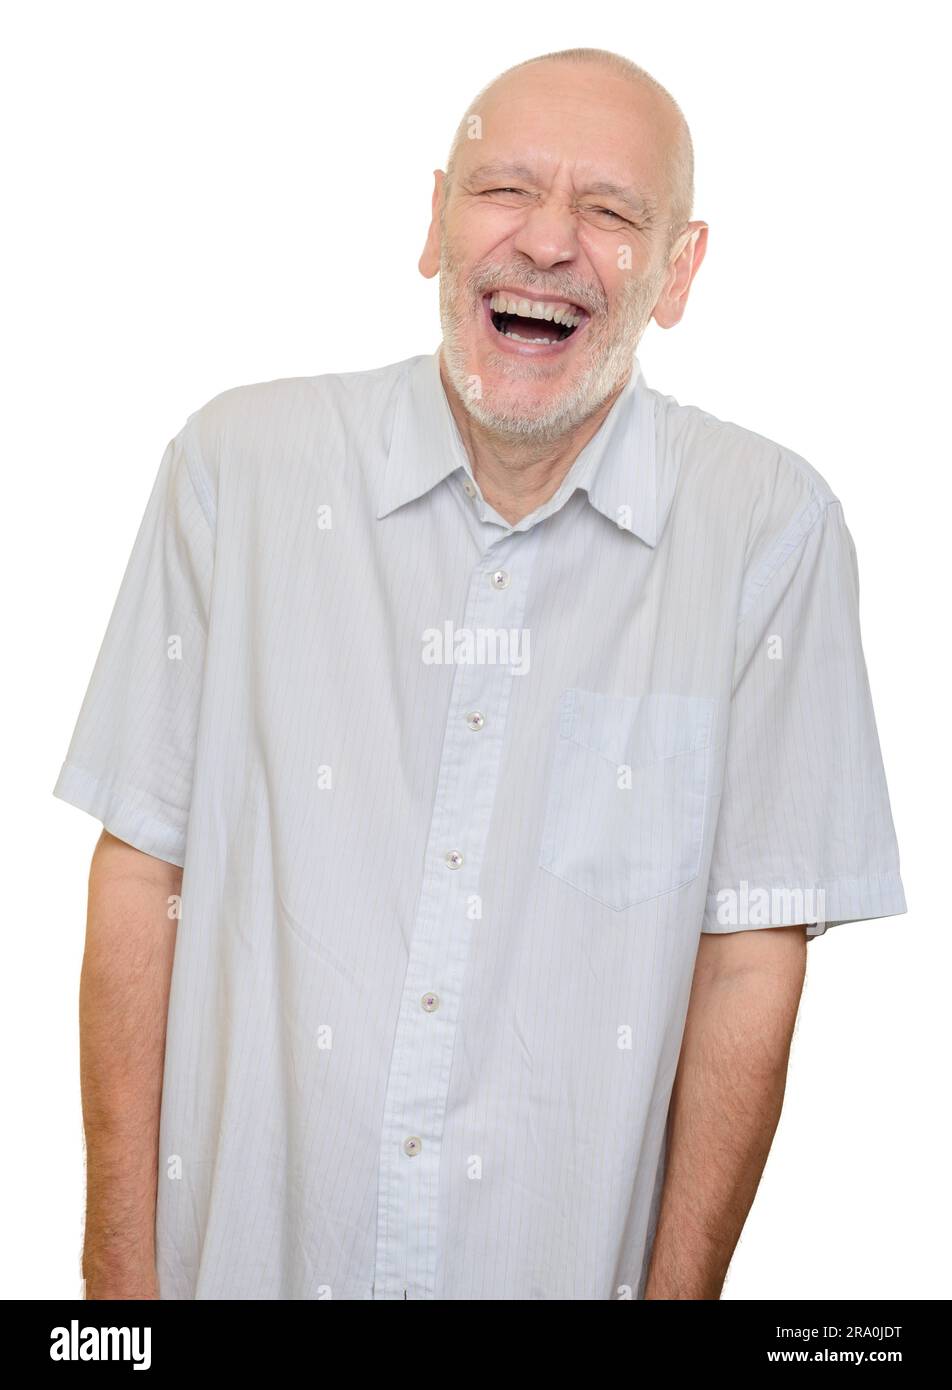 Man with light cotton shirt laughing out loud, isolated on white background Stock Photo